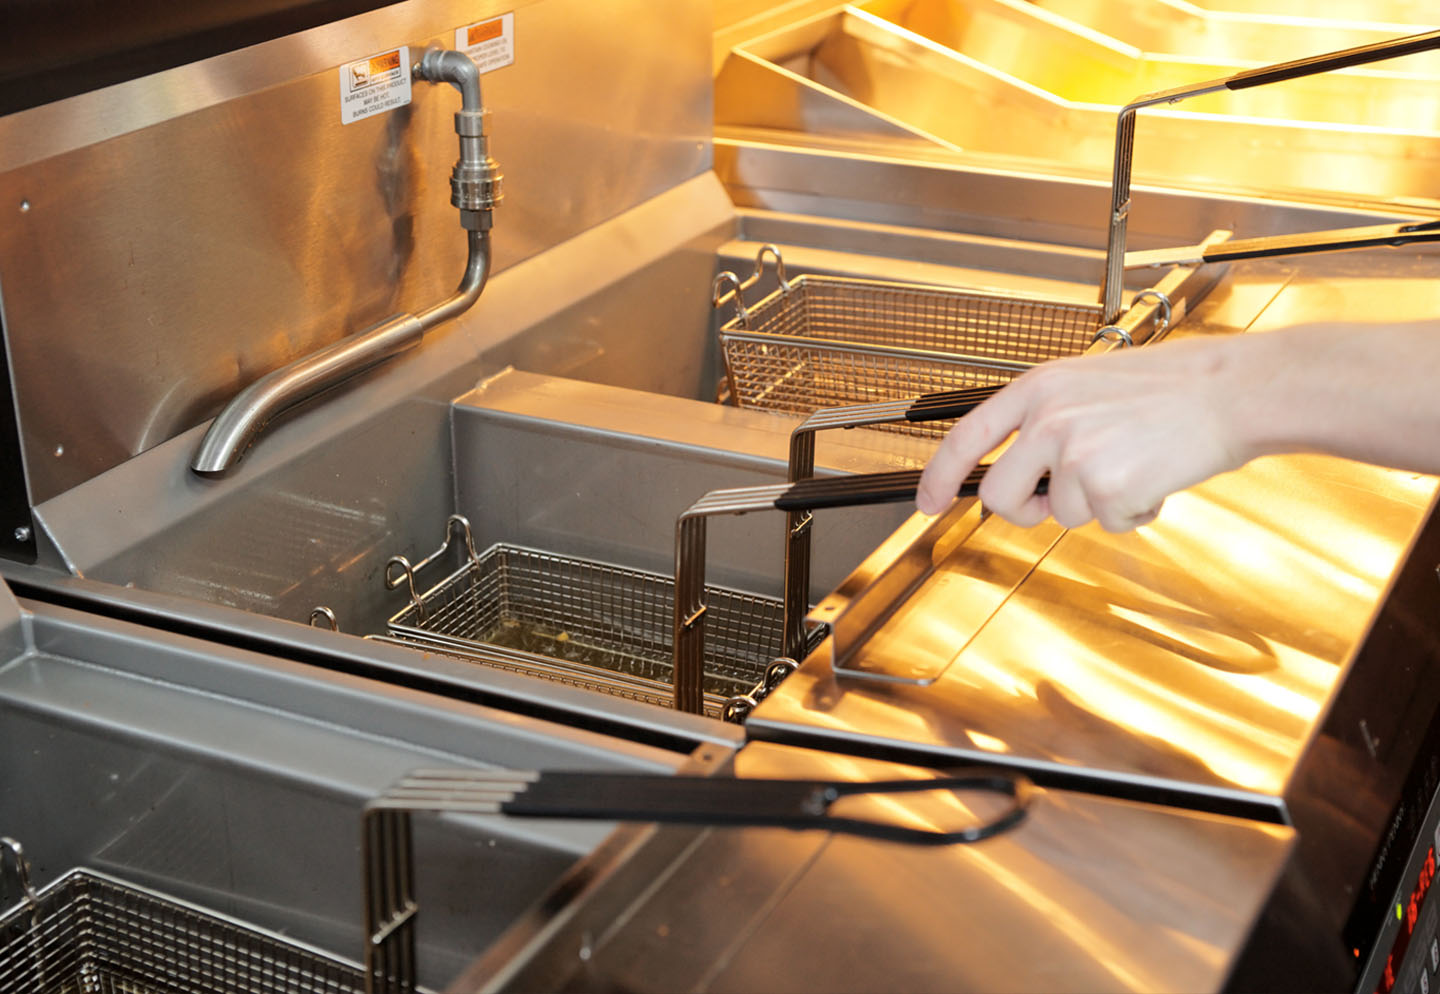 Fryer oil collection service from deep fryers. We will collect oils from restaurants that fry chicken, fries, donuts, meat, fish, etc.  Our service is free and we will make certain that your restaurant doesn’t have an influx of waste oil.  We provide the container storage for your grease.